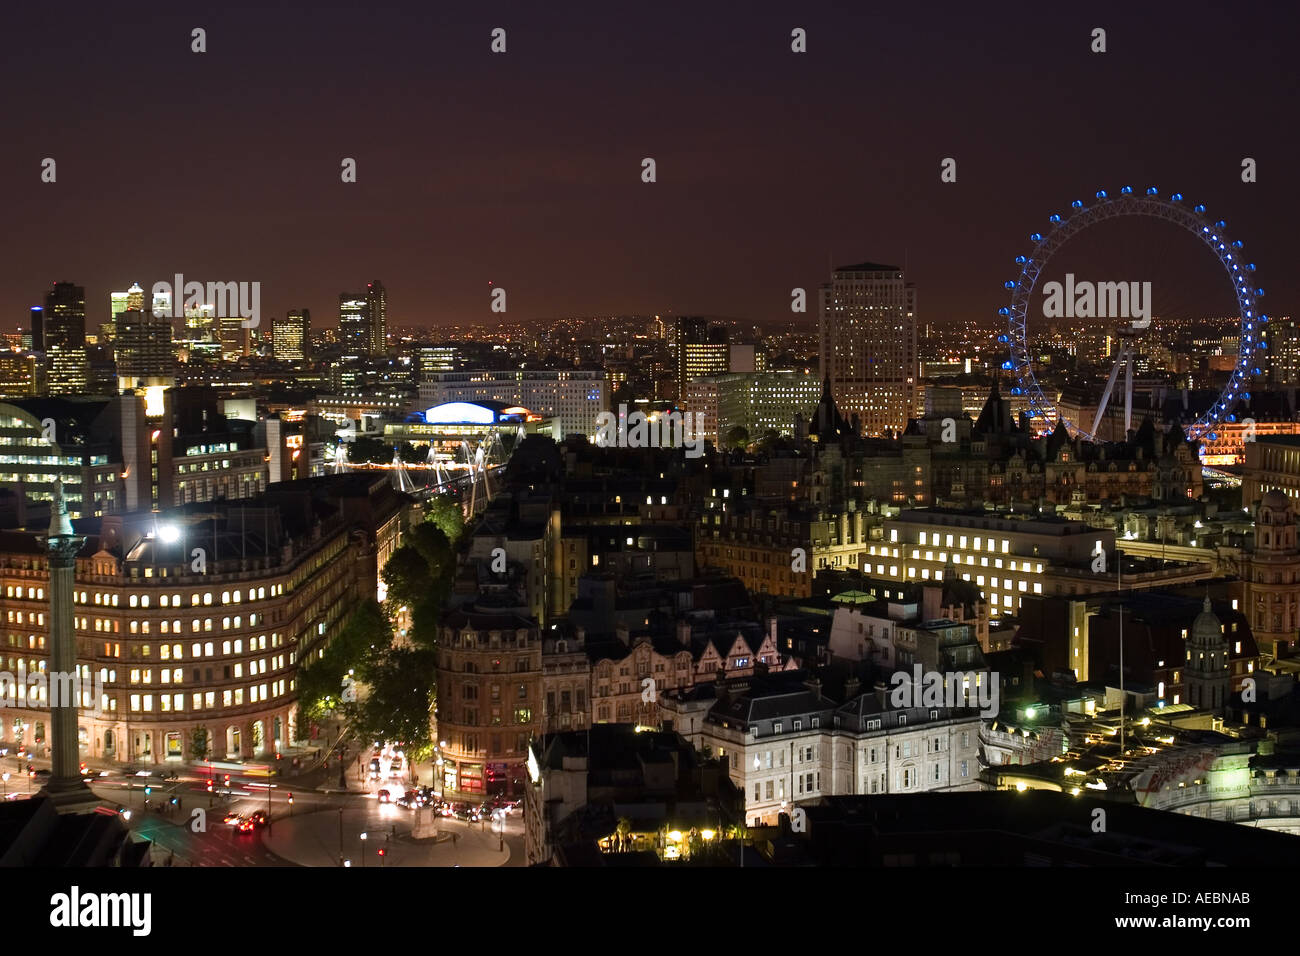 Night view of Londpn from the rooftops showing London Eye Nelson s Column Strand Trafalgar Square Charing Cross and beyond Stock Photo